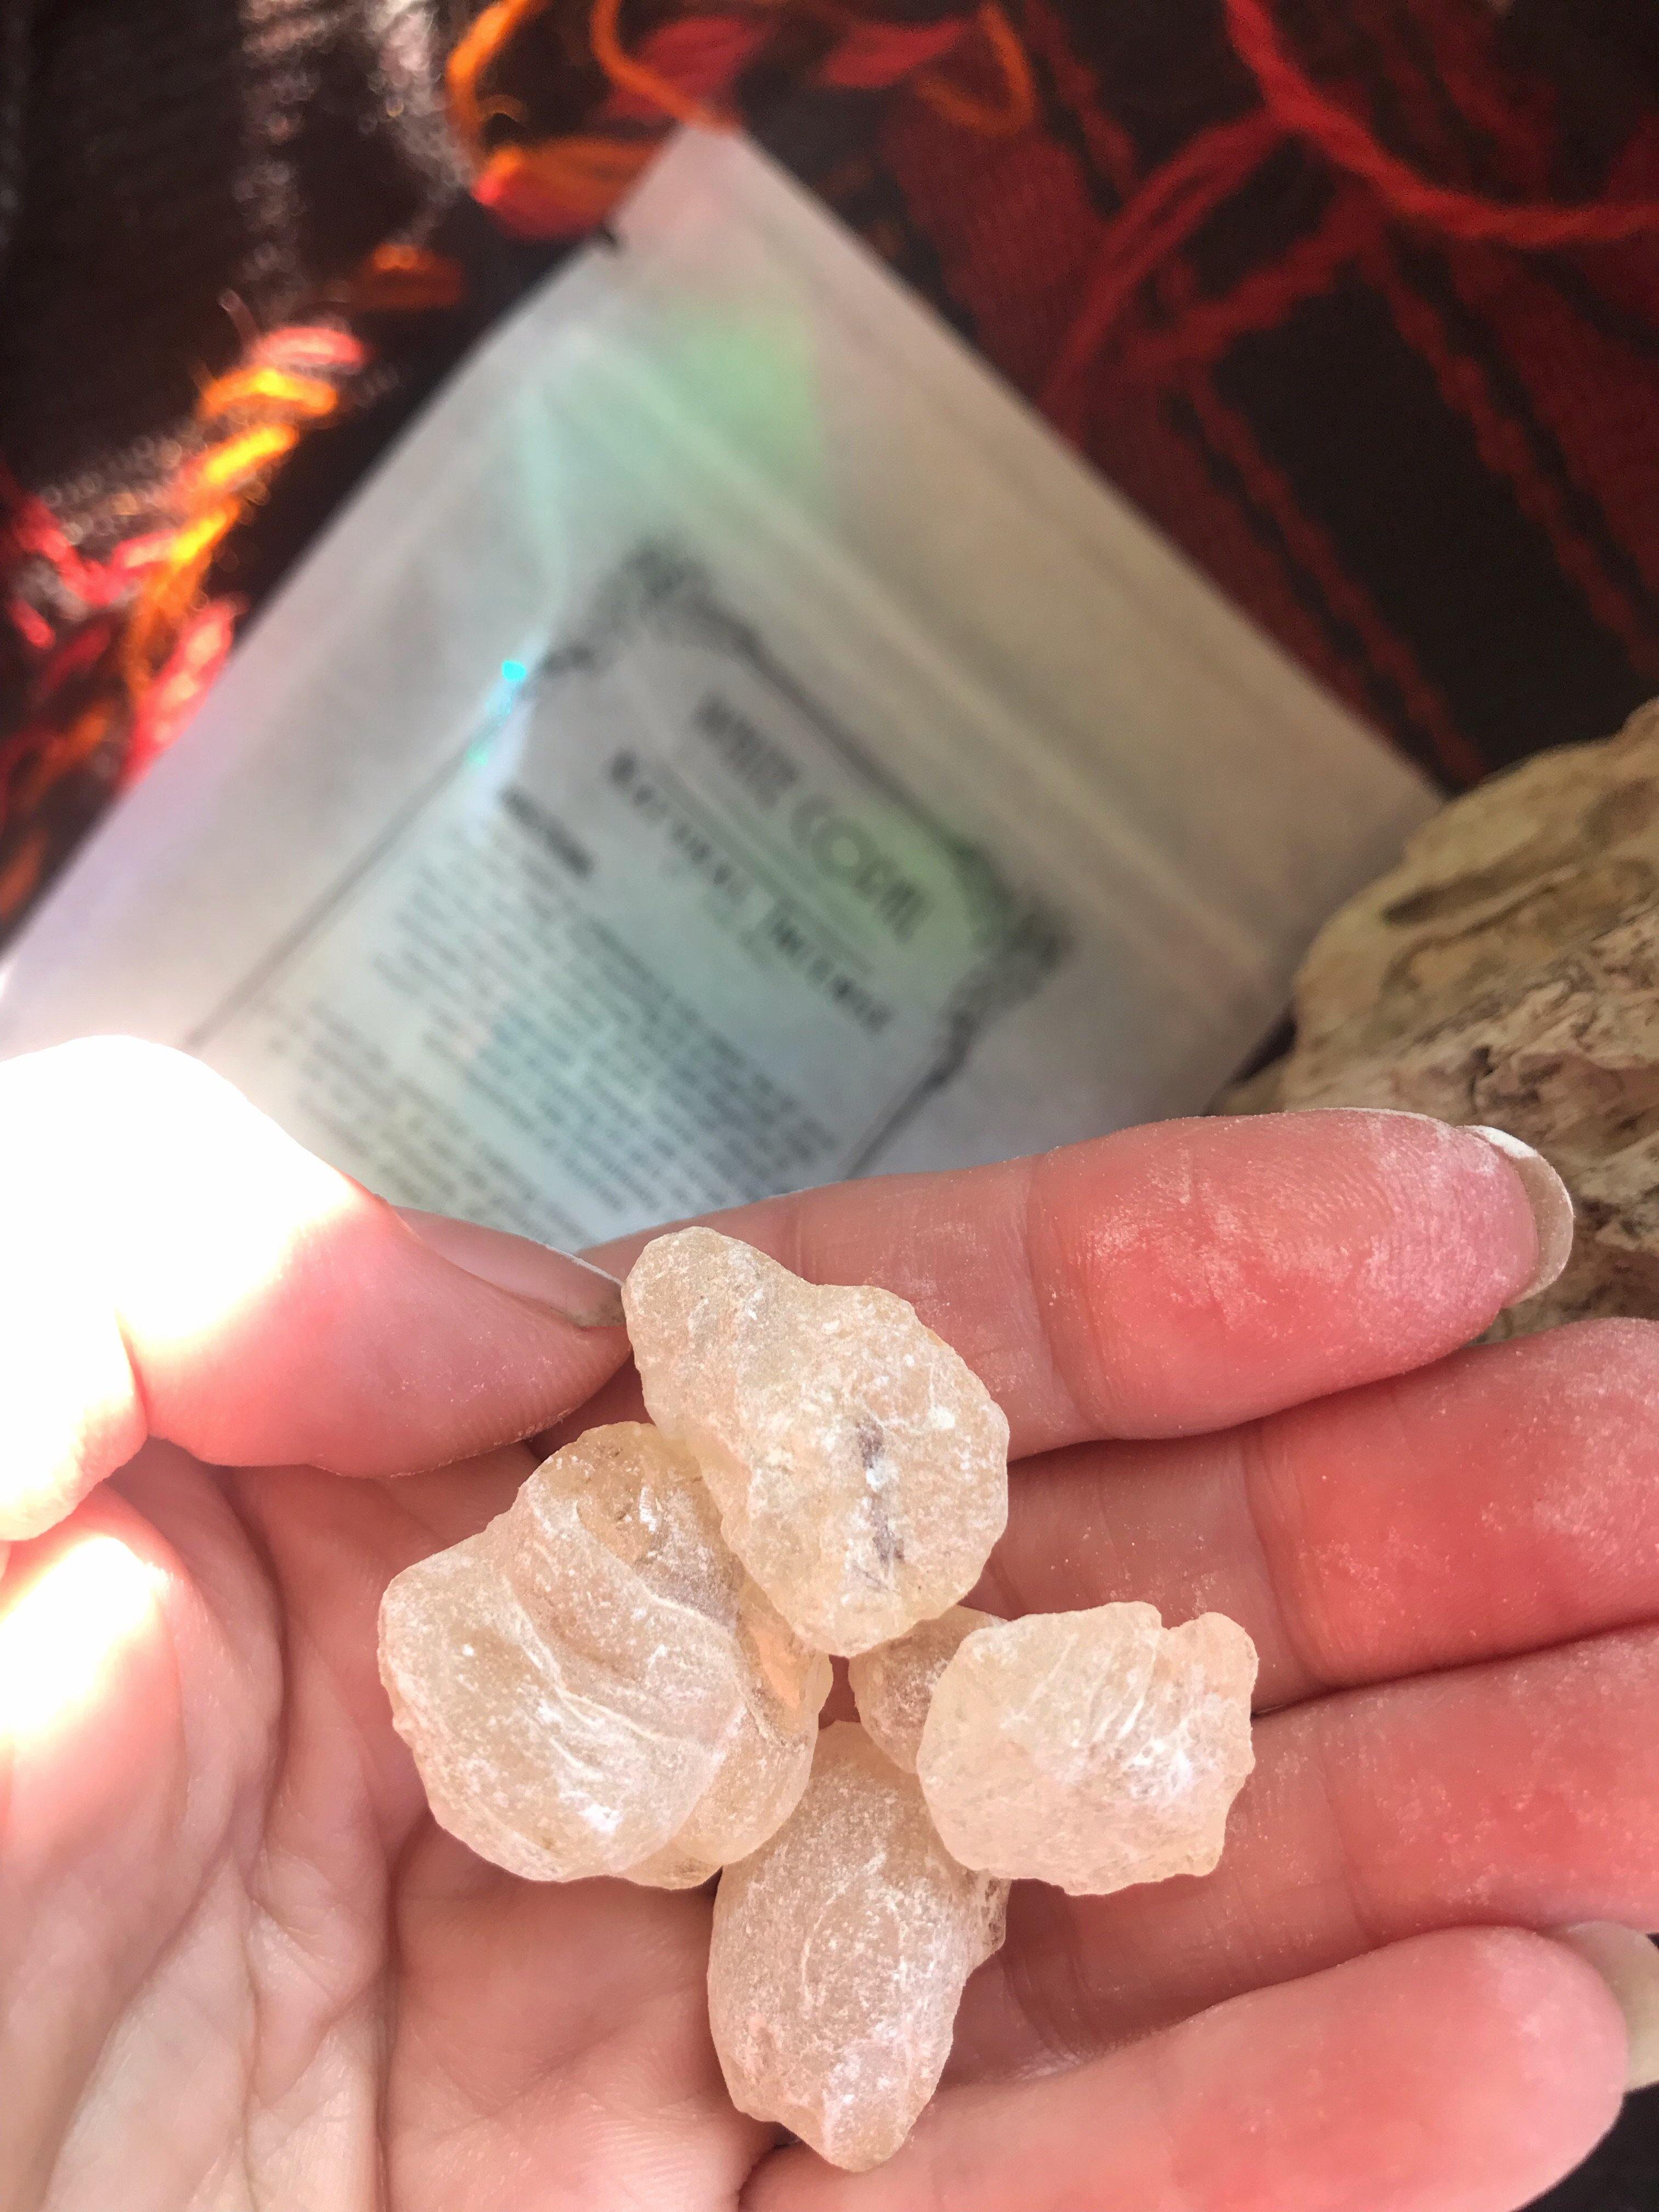 White Copal (Mexico) Resin - For Incense, Spells, and Potions - Keven Craft Rituals